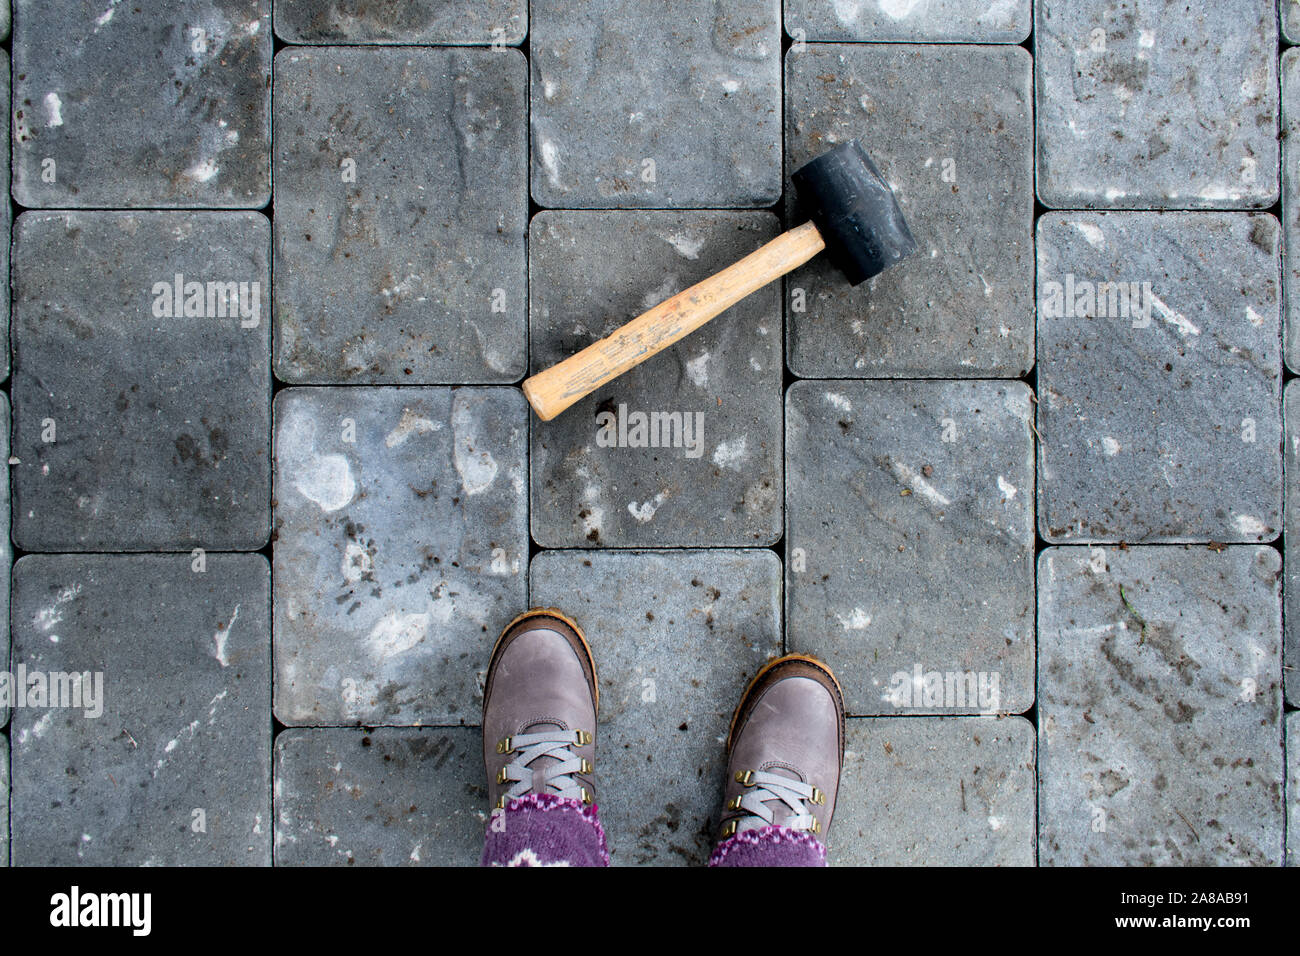 Woman in boots looking down at her feet and mallet on paver patio, over the shoulder view, MR Stock Photo